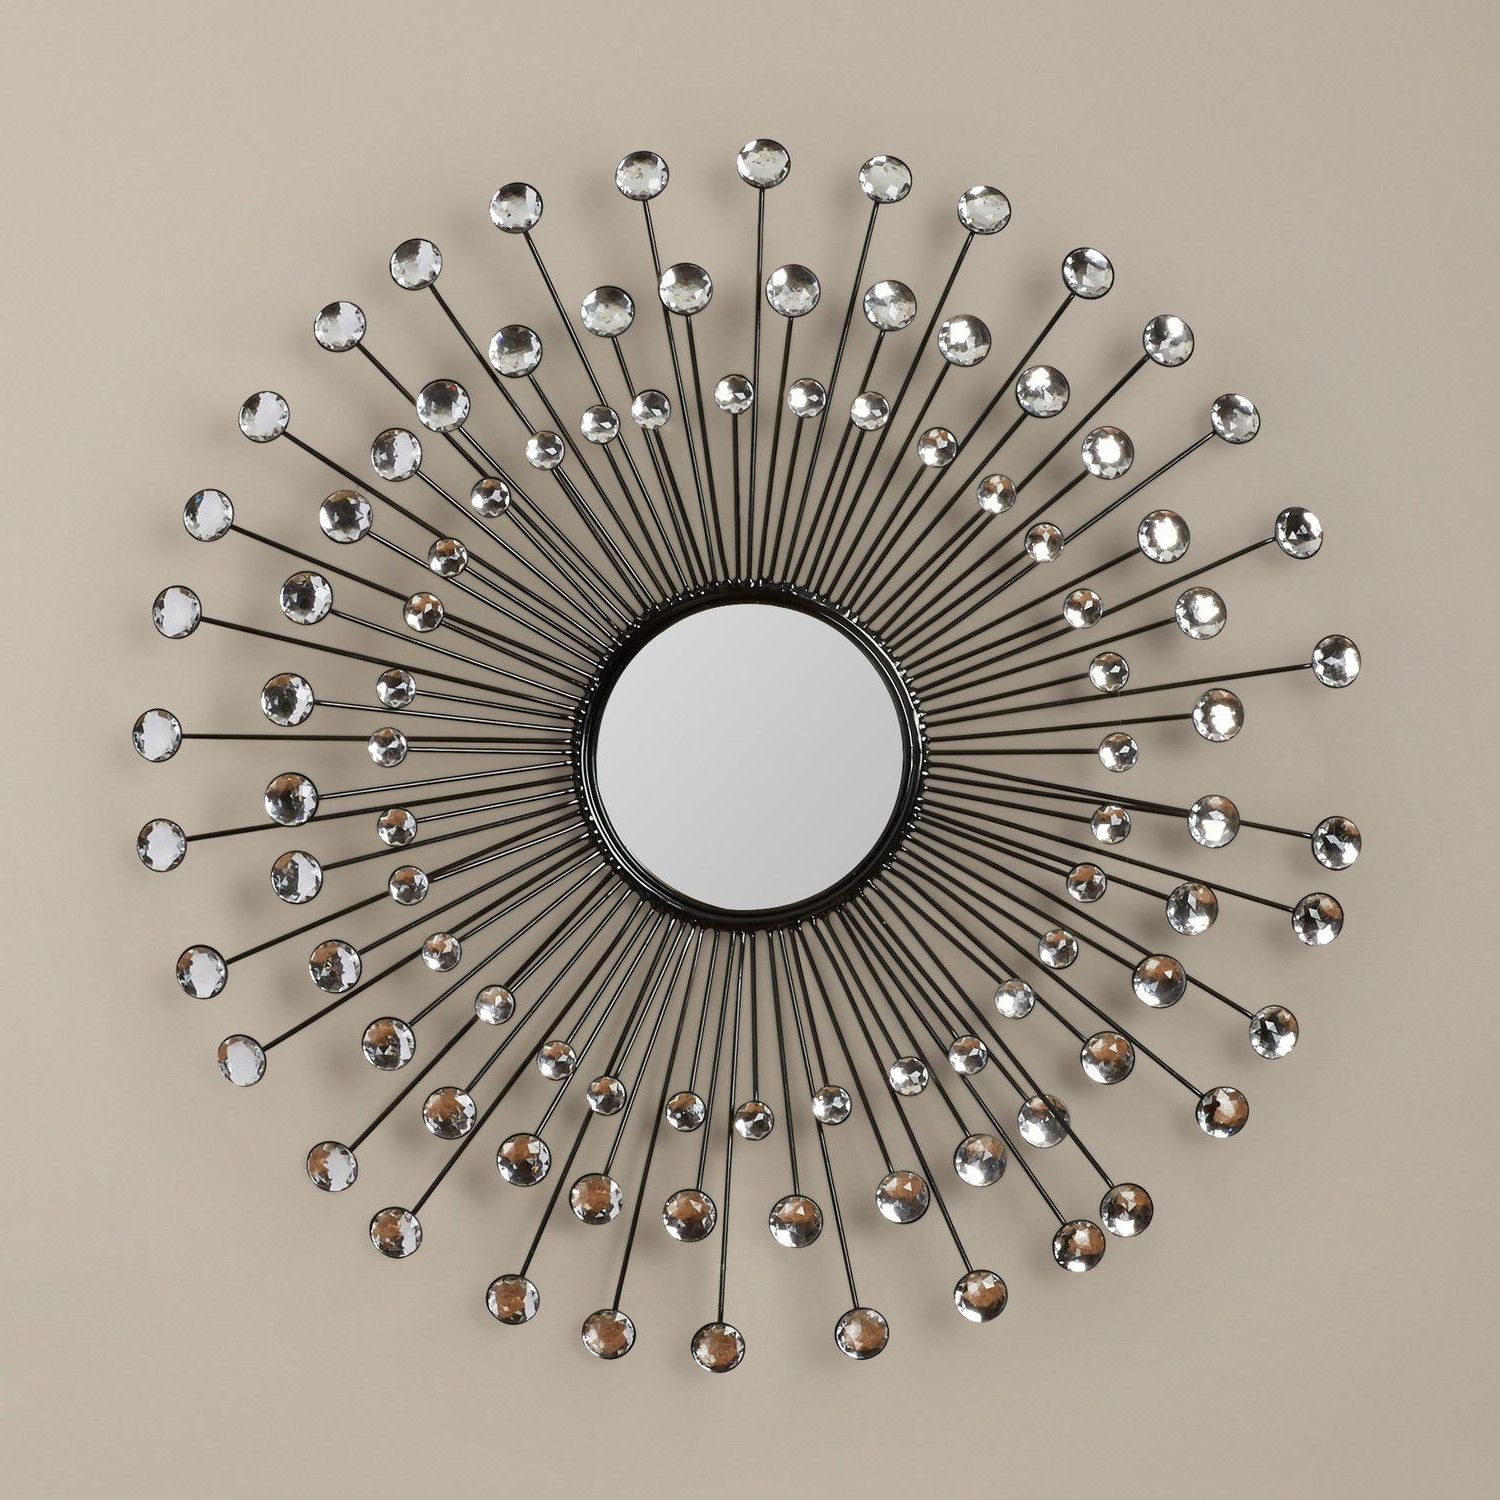 Carstens Sunburst Leaves Wall Mirrors With Current Accent Sunburst Mirrors Youll Love Wayfair Look At This (View 16 of 20)